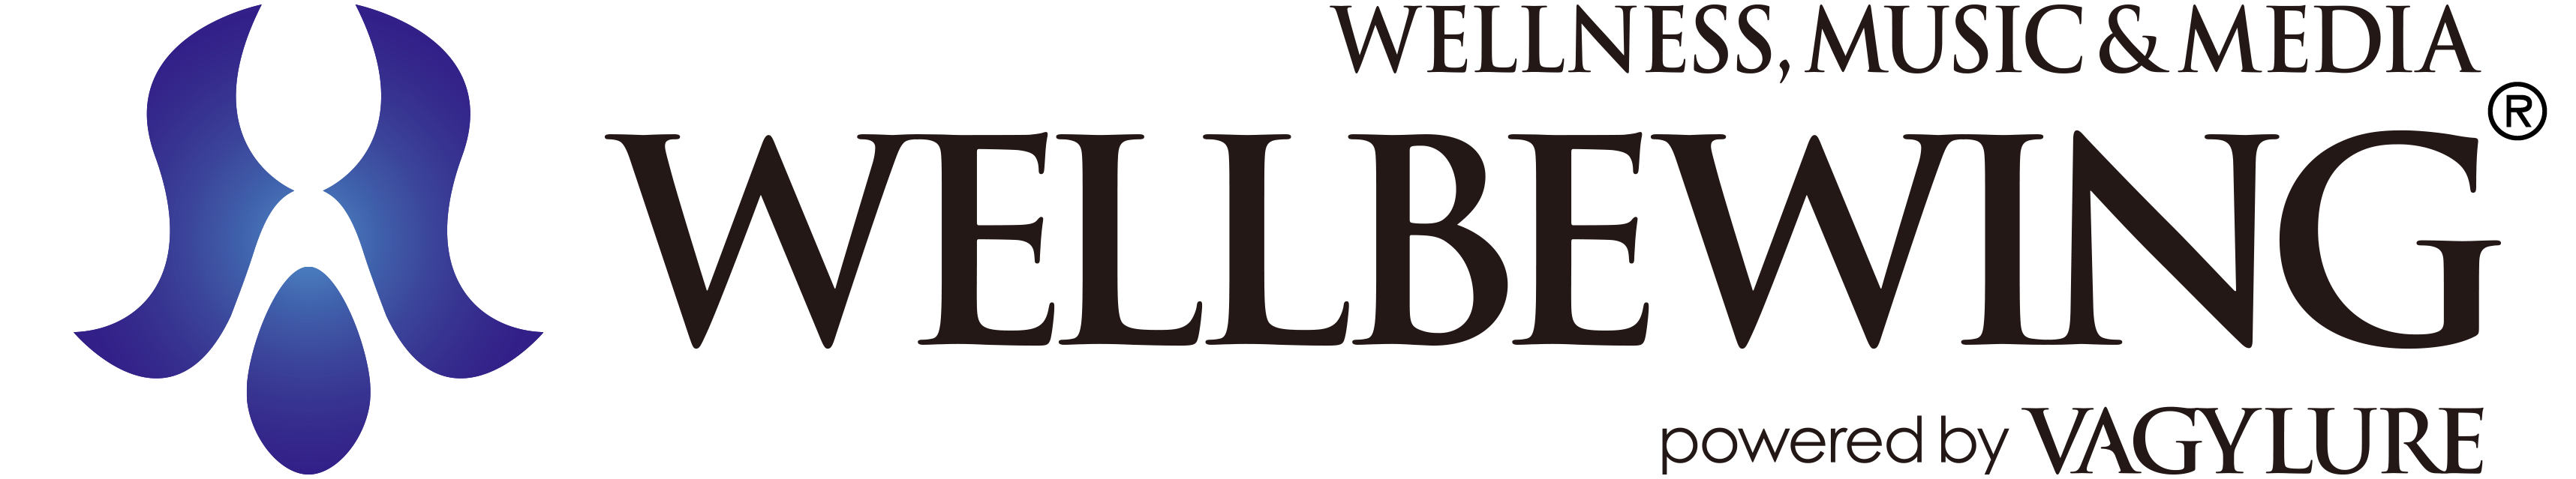 WELLBEWING®